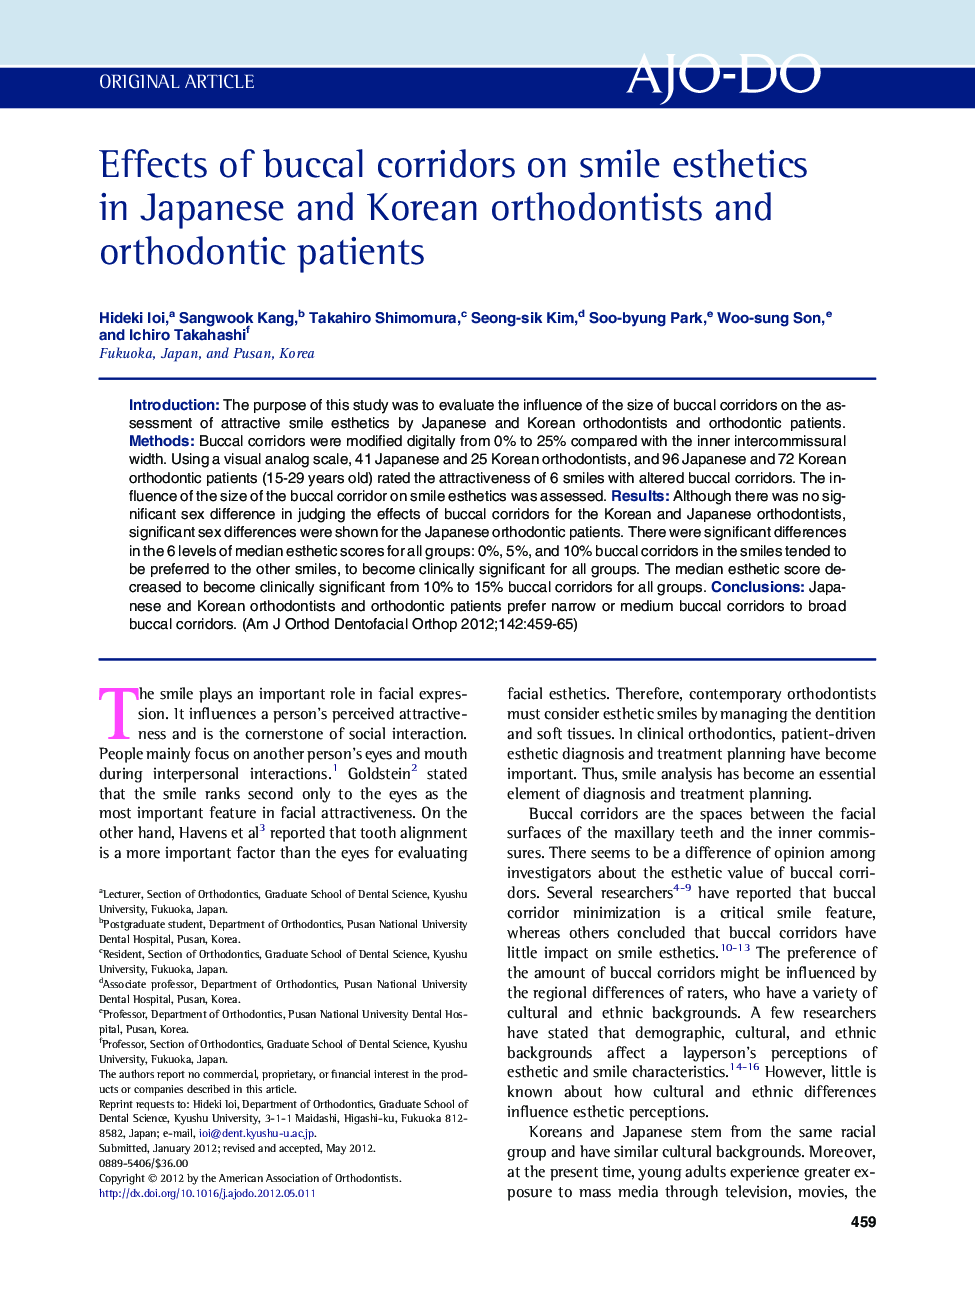 Effects of buccal corridors on smile esthetics in Japanese and Korean orthodontists and orthodontic patients 